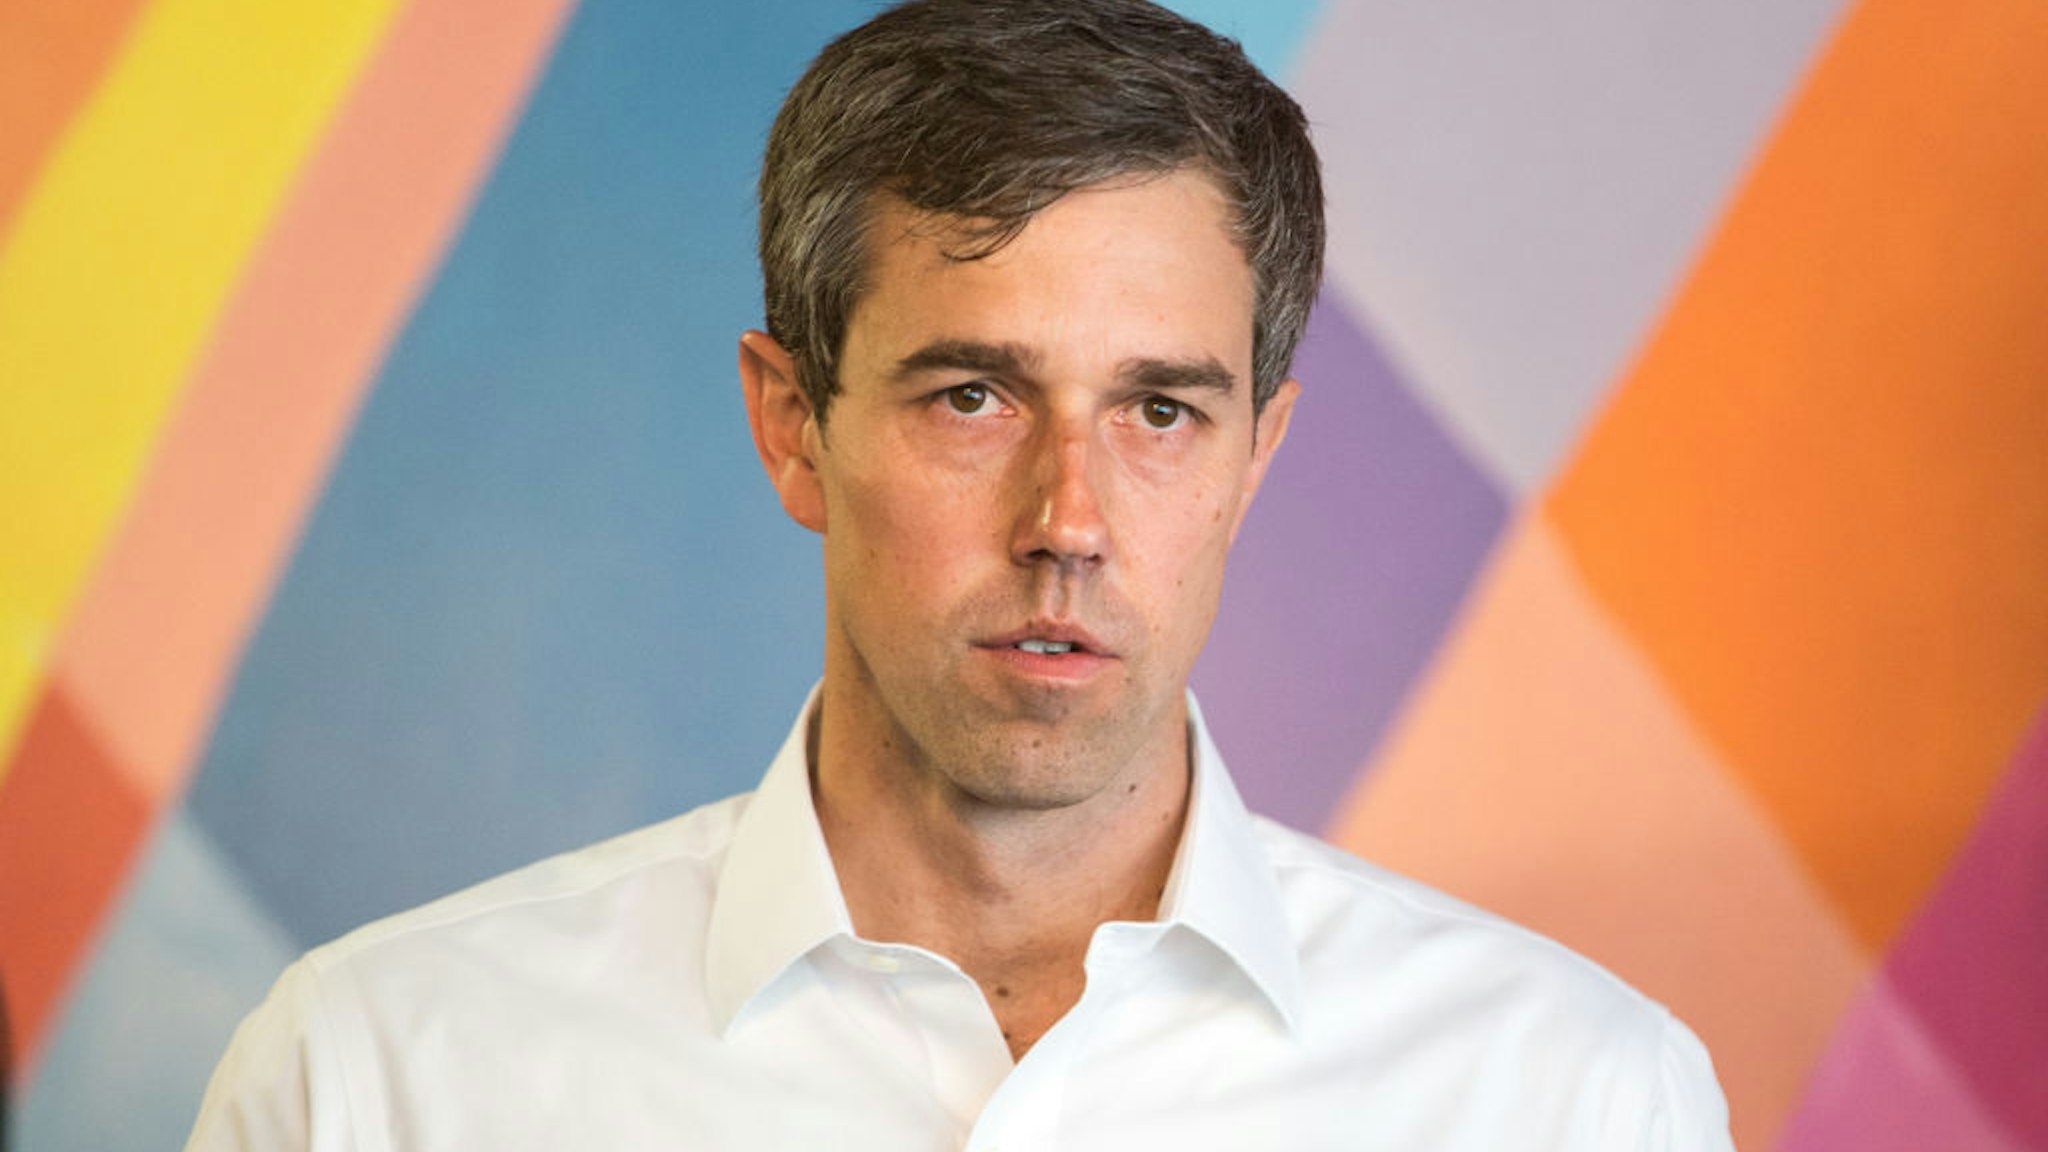 Beto O'Rourke speaks during a campaign stop at a cafe on April 19, 2019